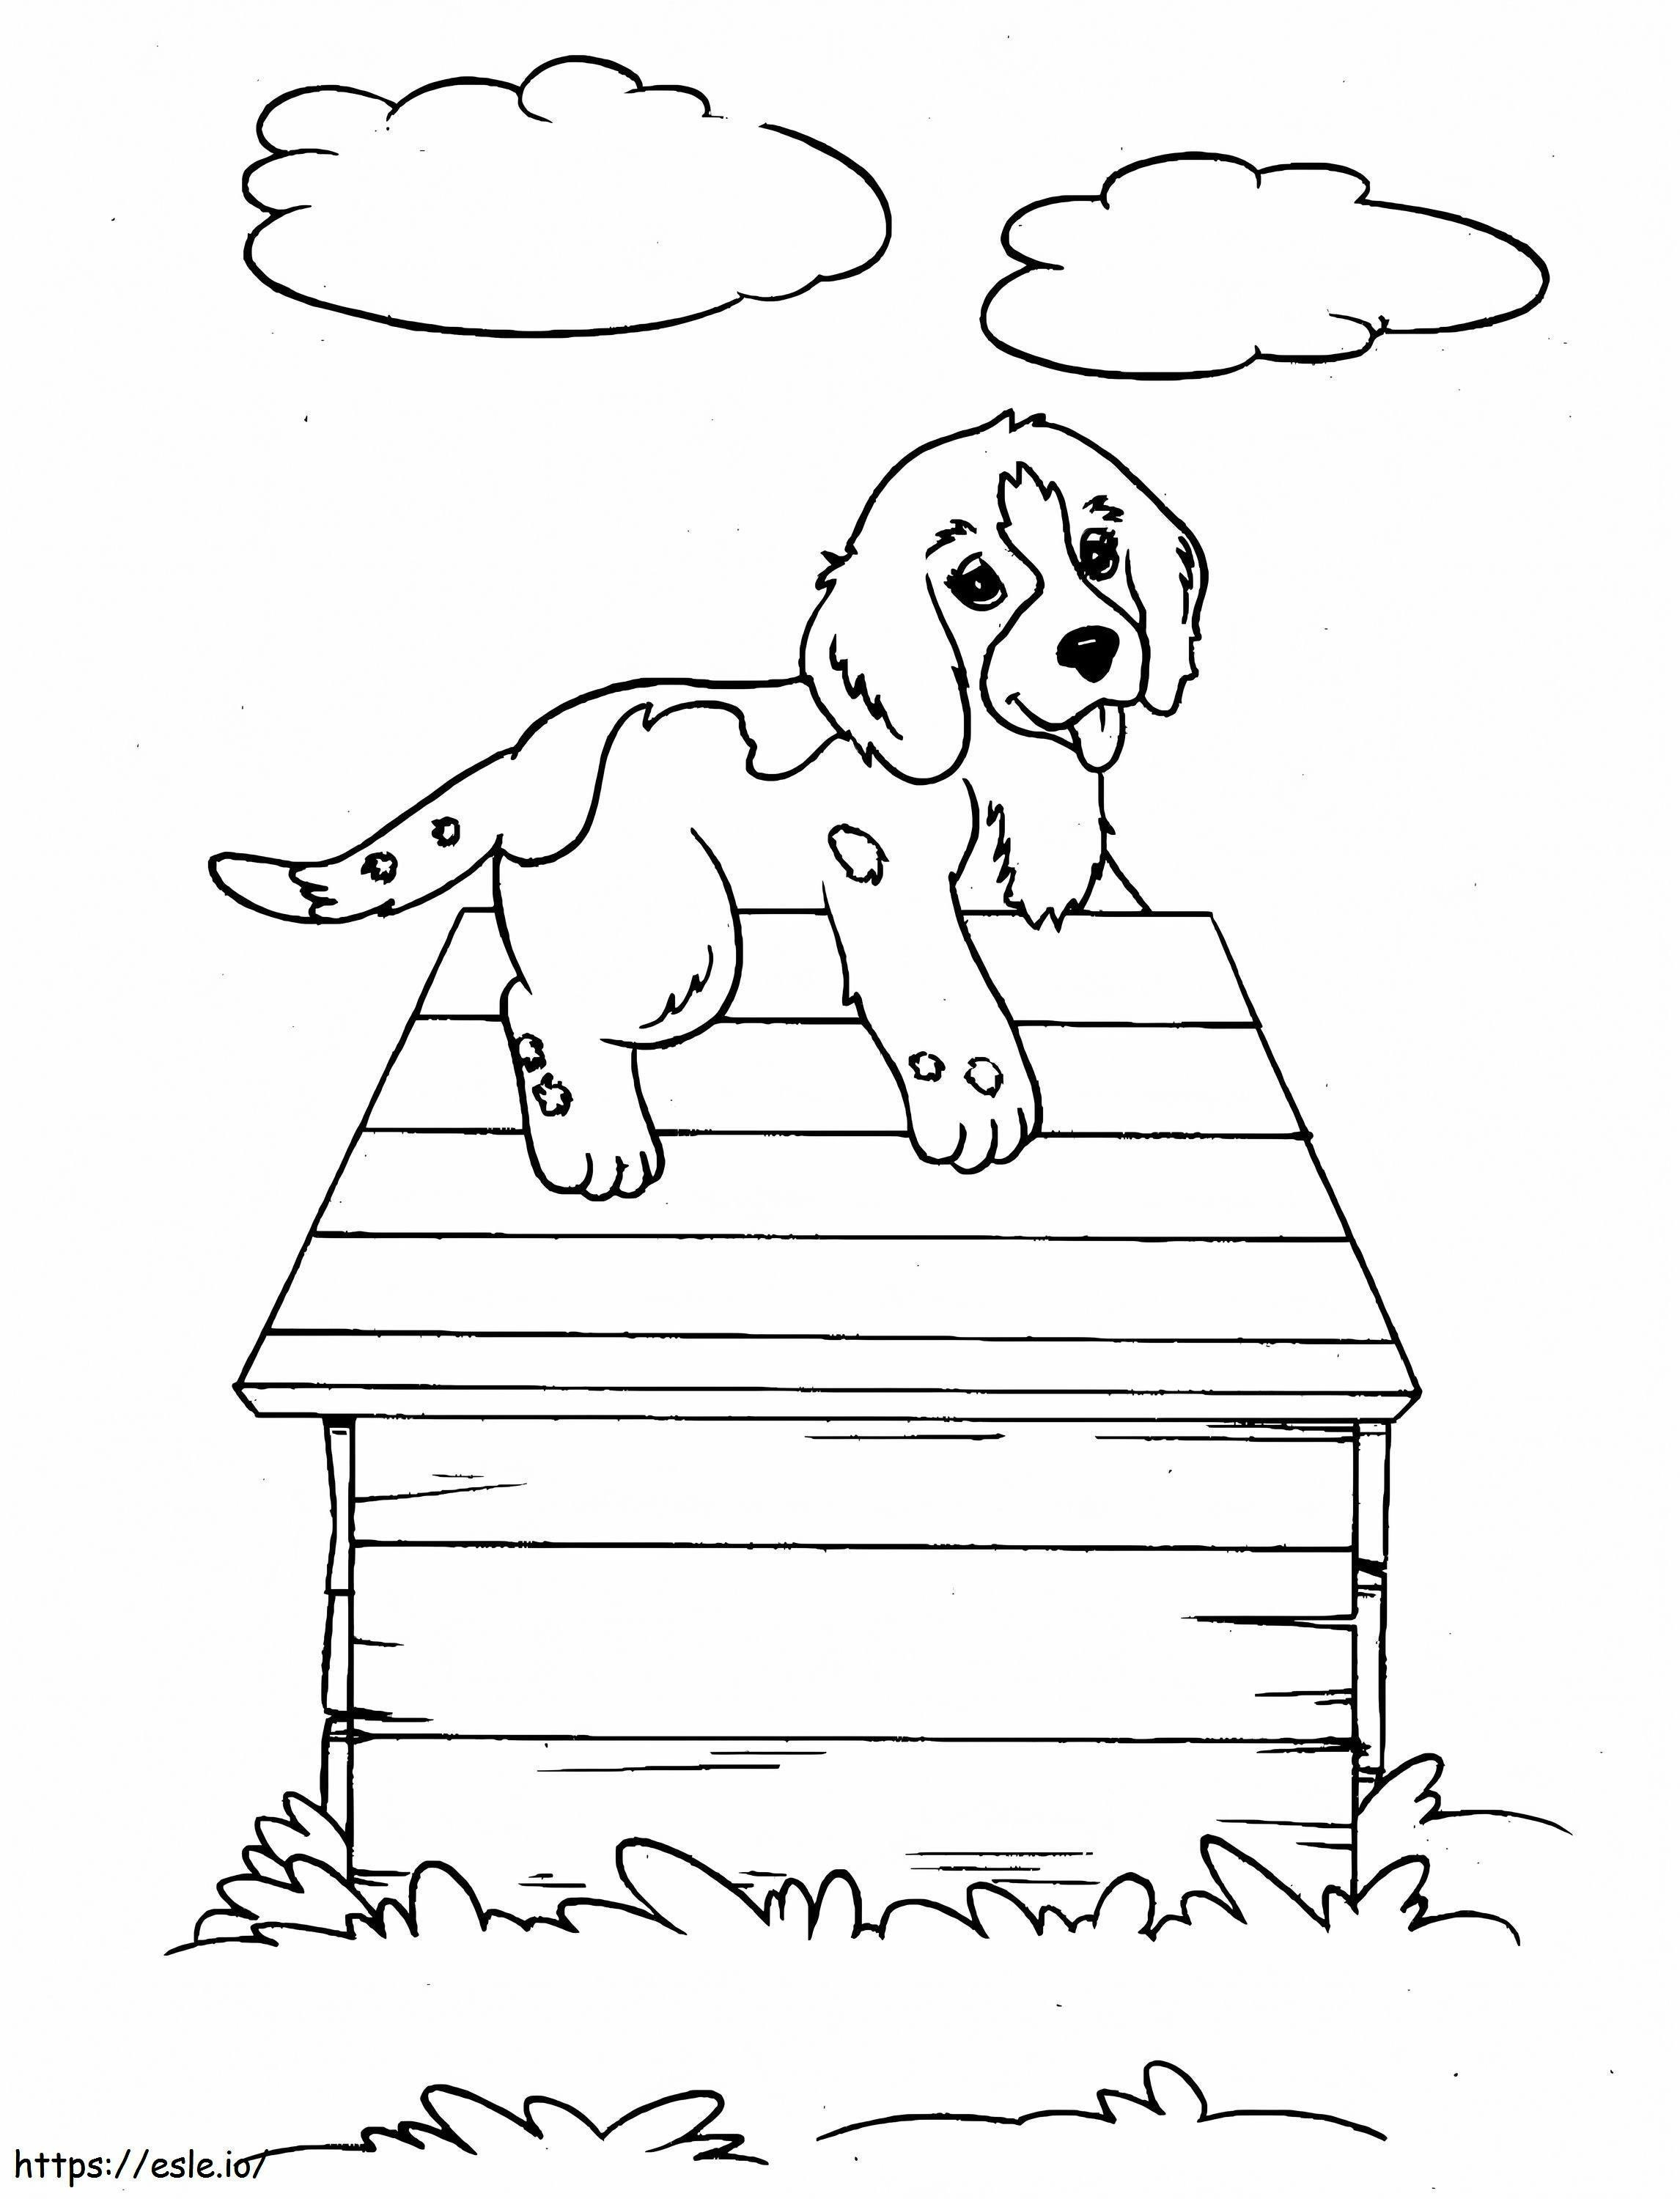 Dog In The Doghouse coloring page